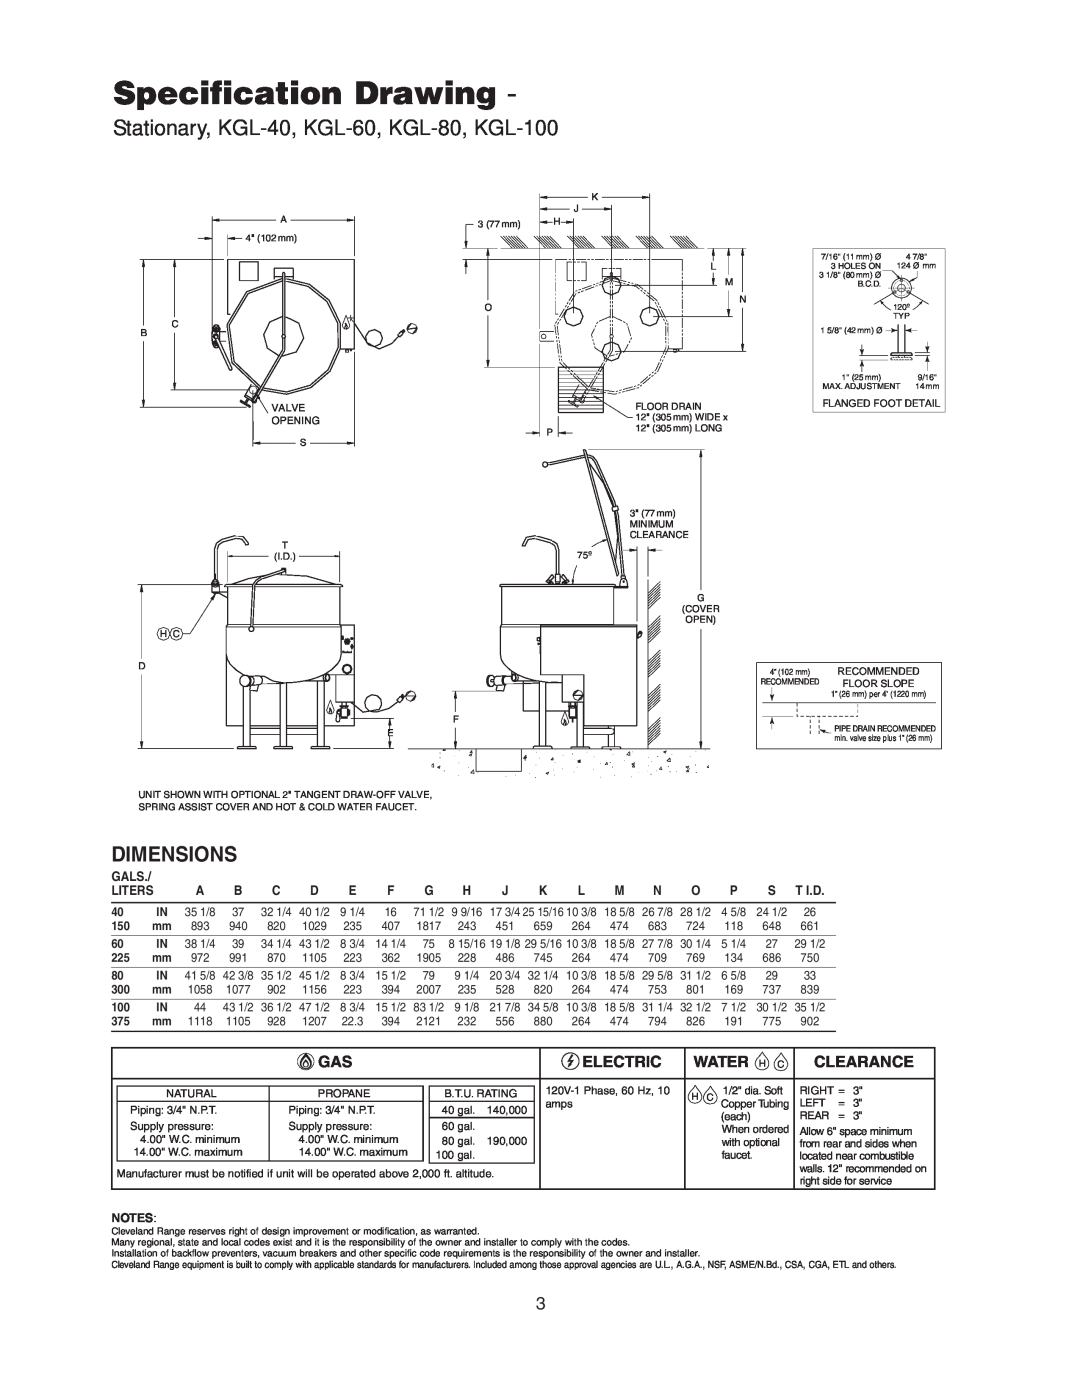 Cleveland Range KGL-40-TSH, KGL-40, KGL-40-T, KGL-40SH Specification Drawing, Dimensions, Electric, Water H C, Clearance 